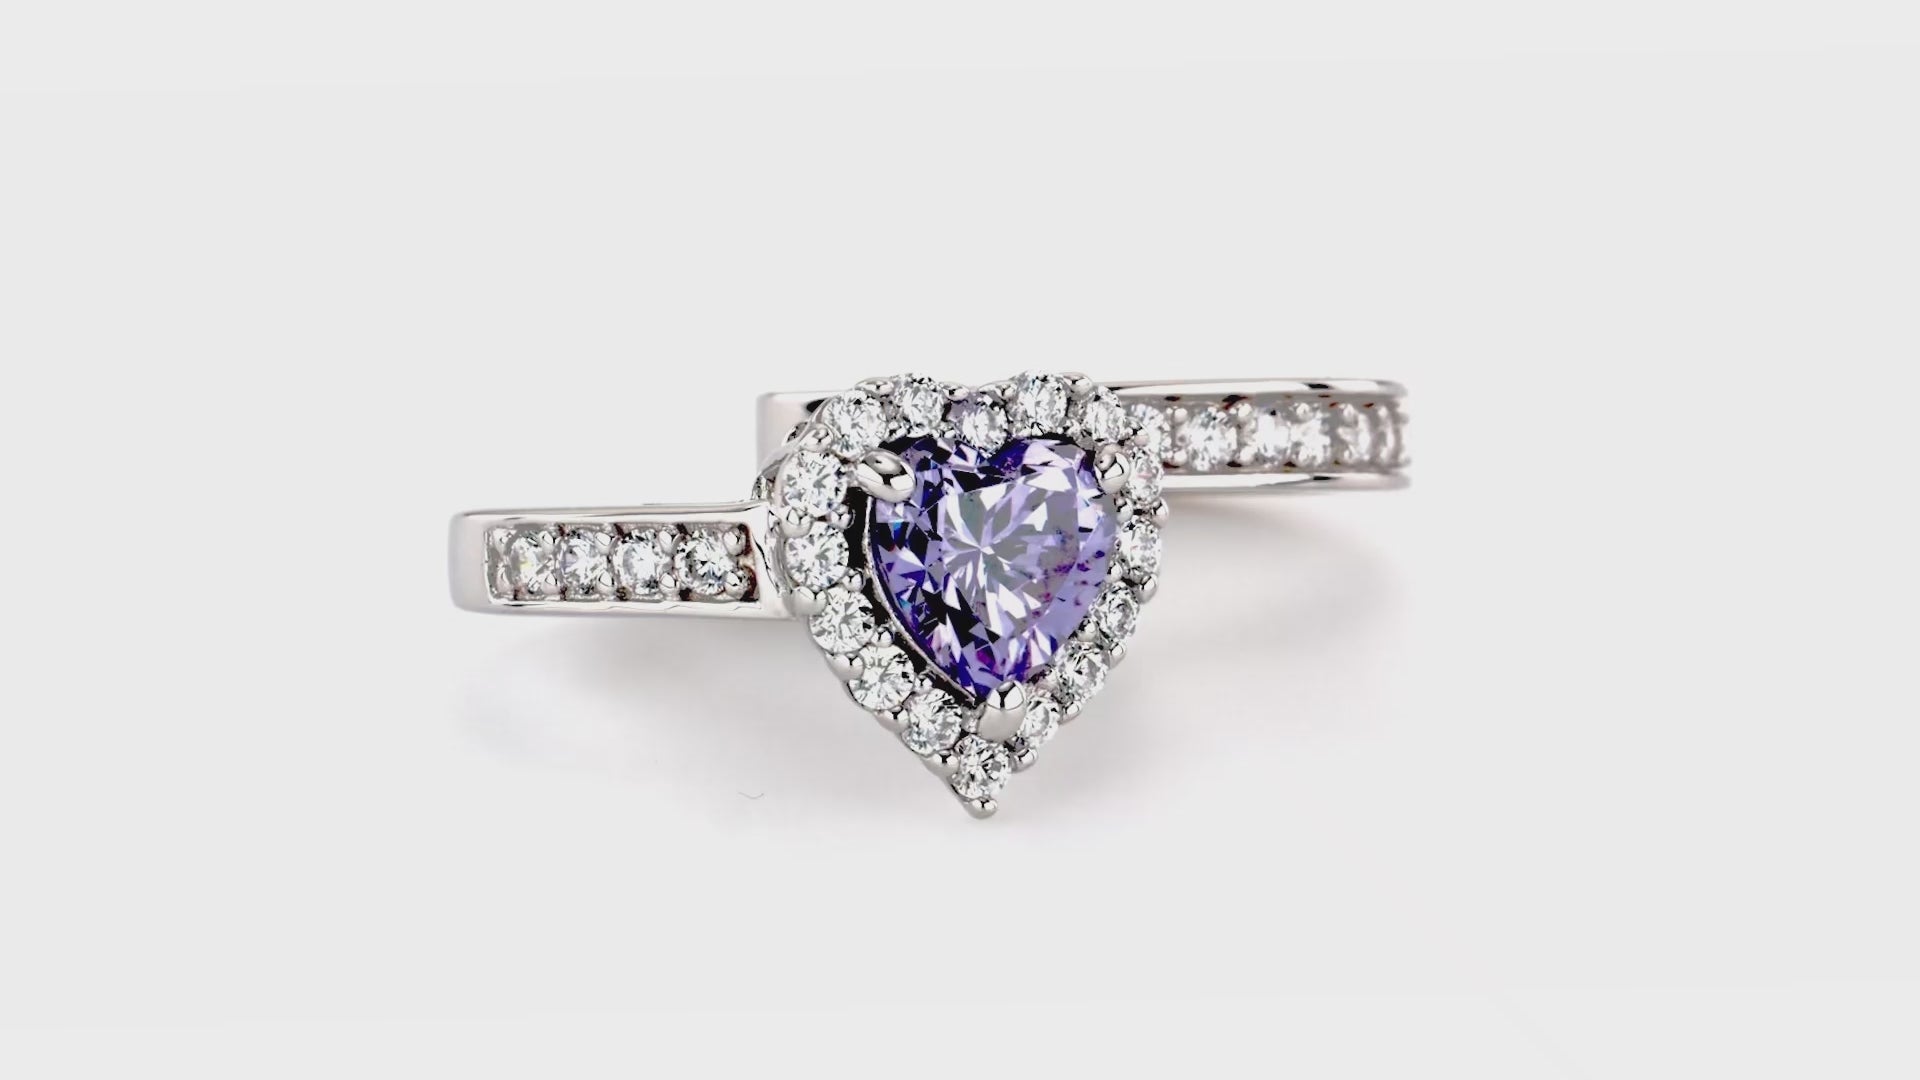 Video Contains Halo Purple Heart CZ Ring Set in Sterling Silver. Style Number R608